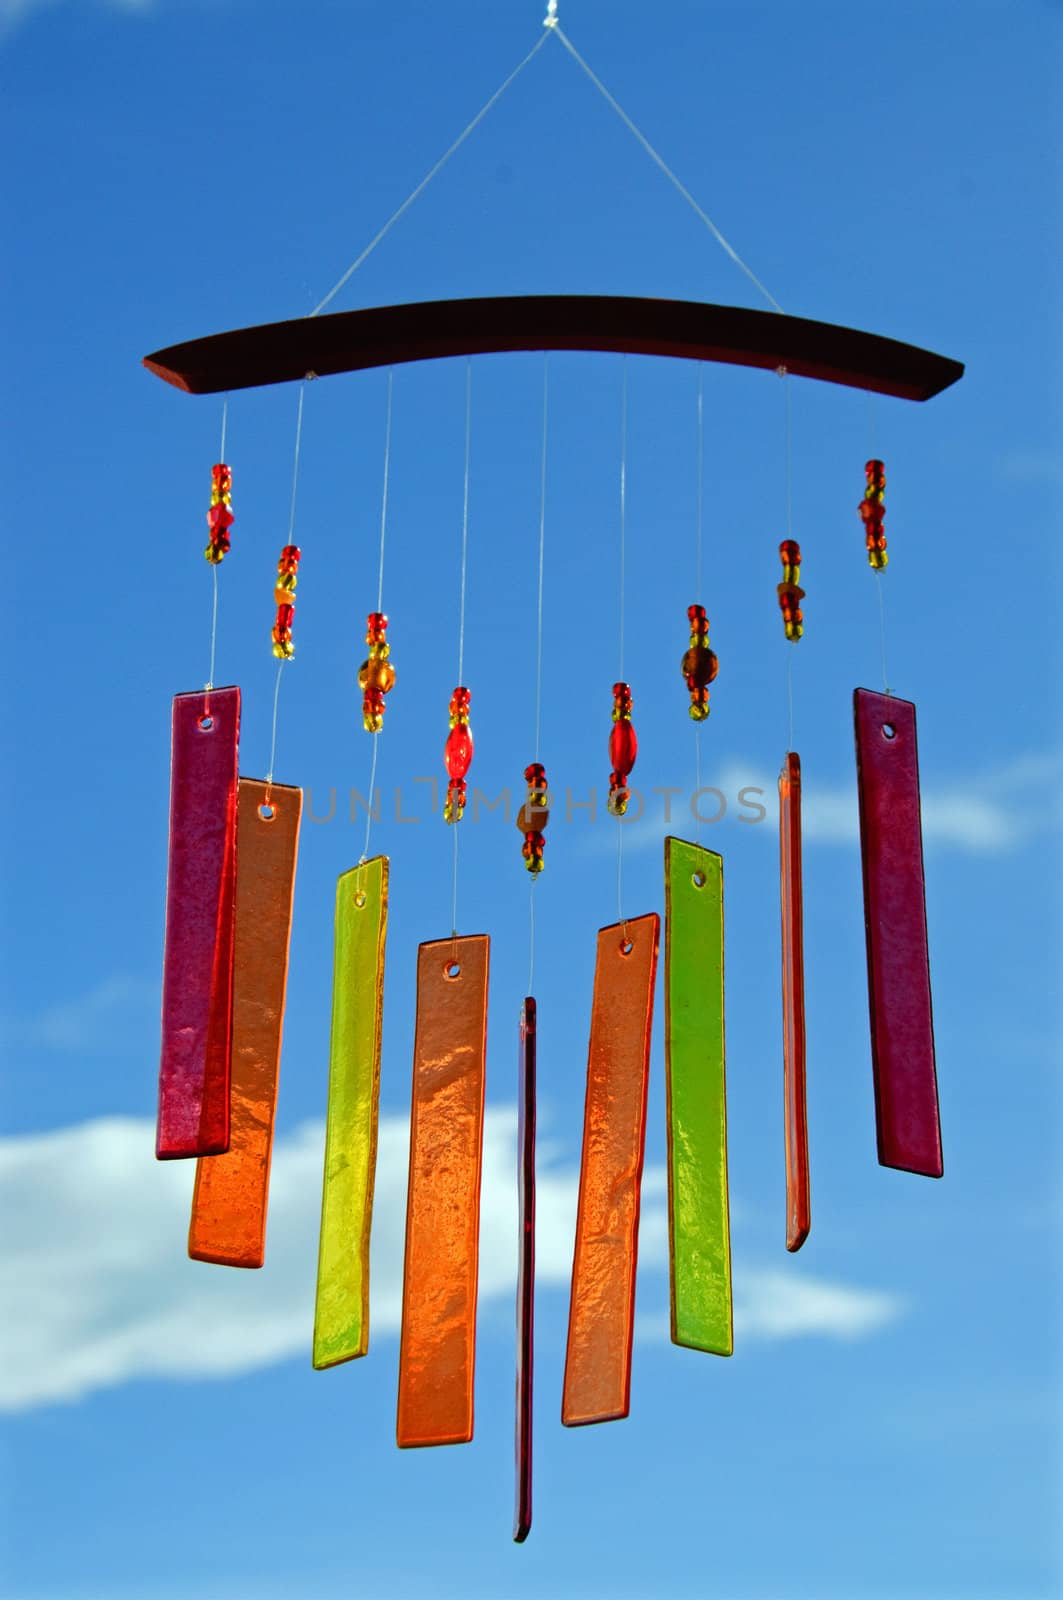 A wind chimes made of glass, pearls and vivid colours